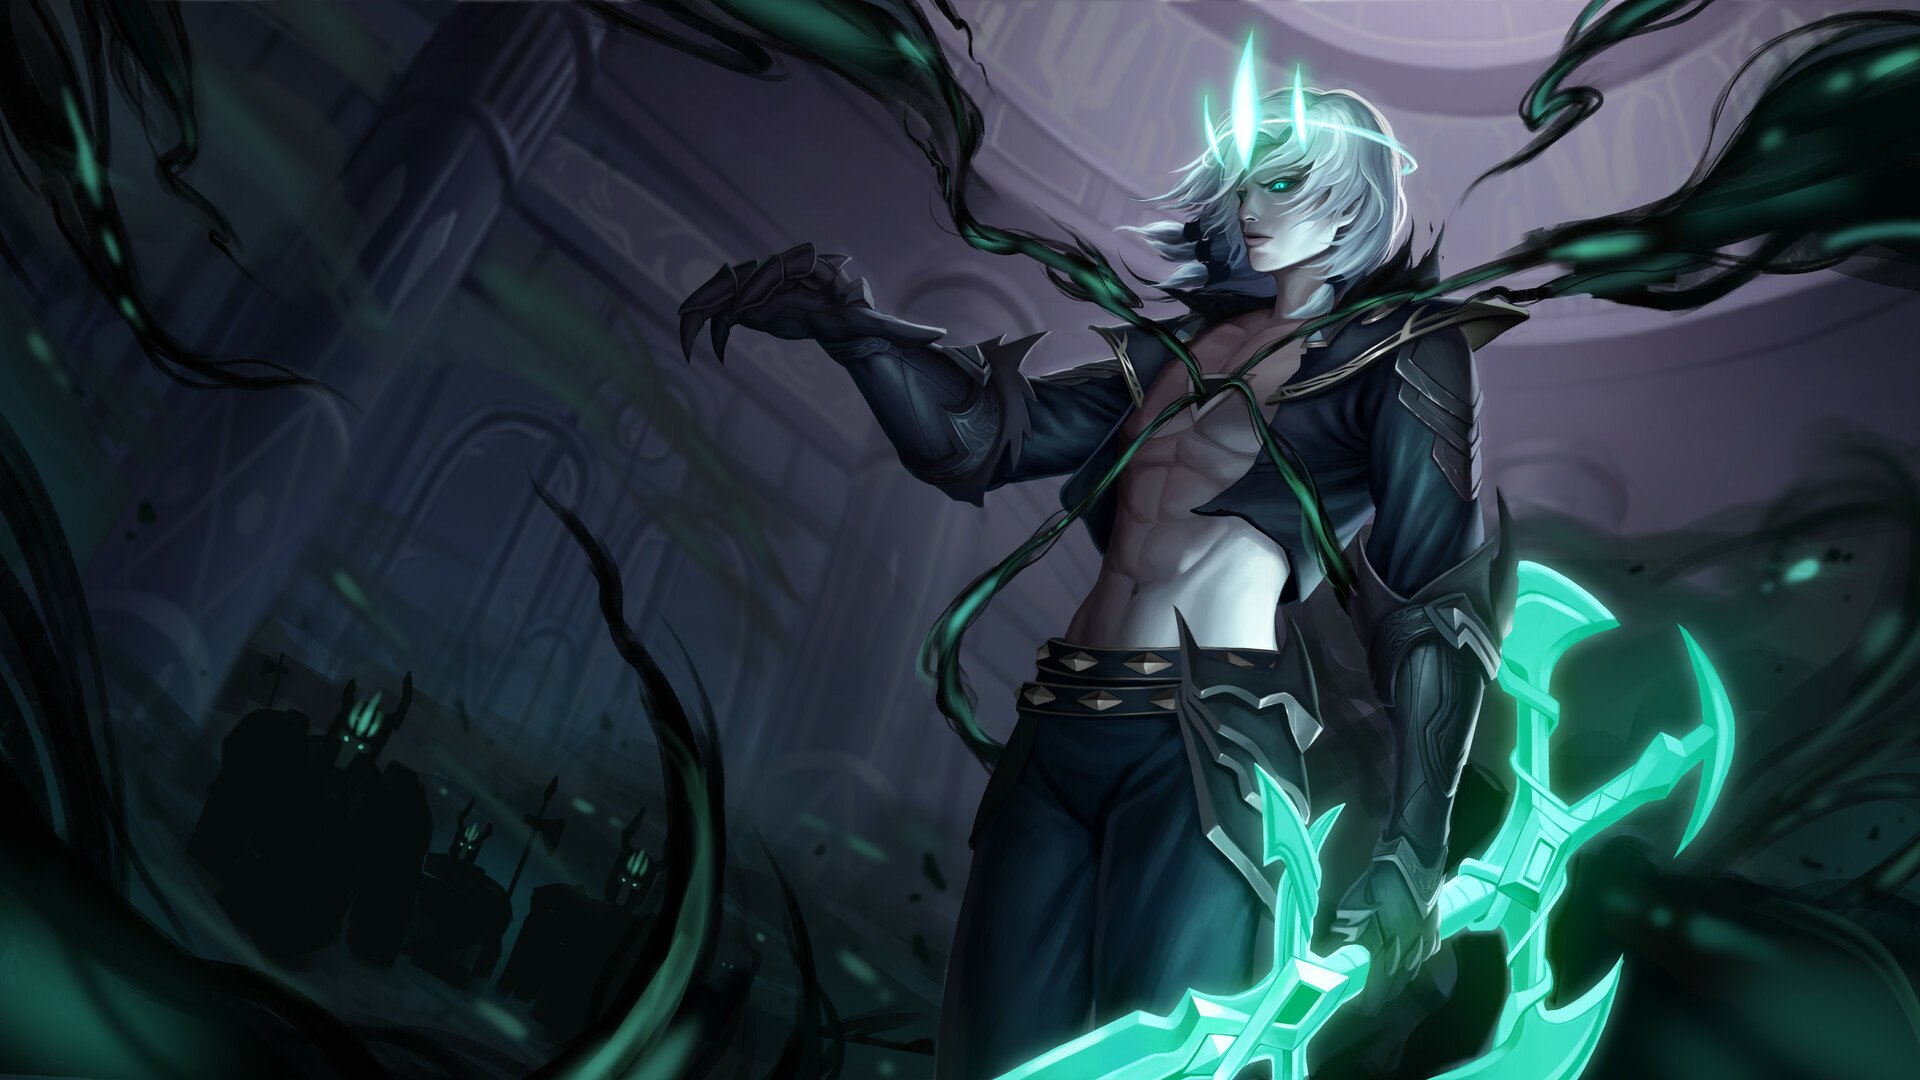 20 Viego League Of Legends Hd Wallpapers And Backgrounds 2951